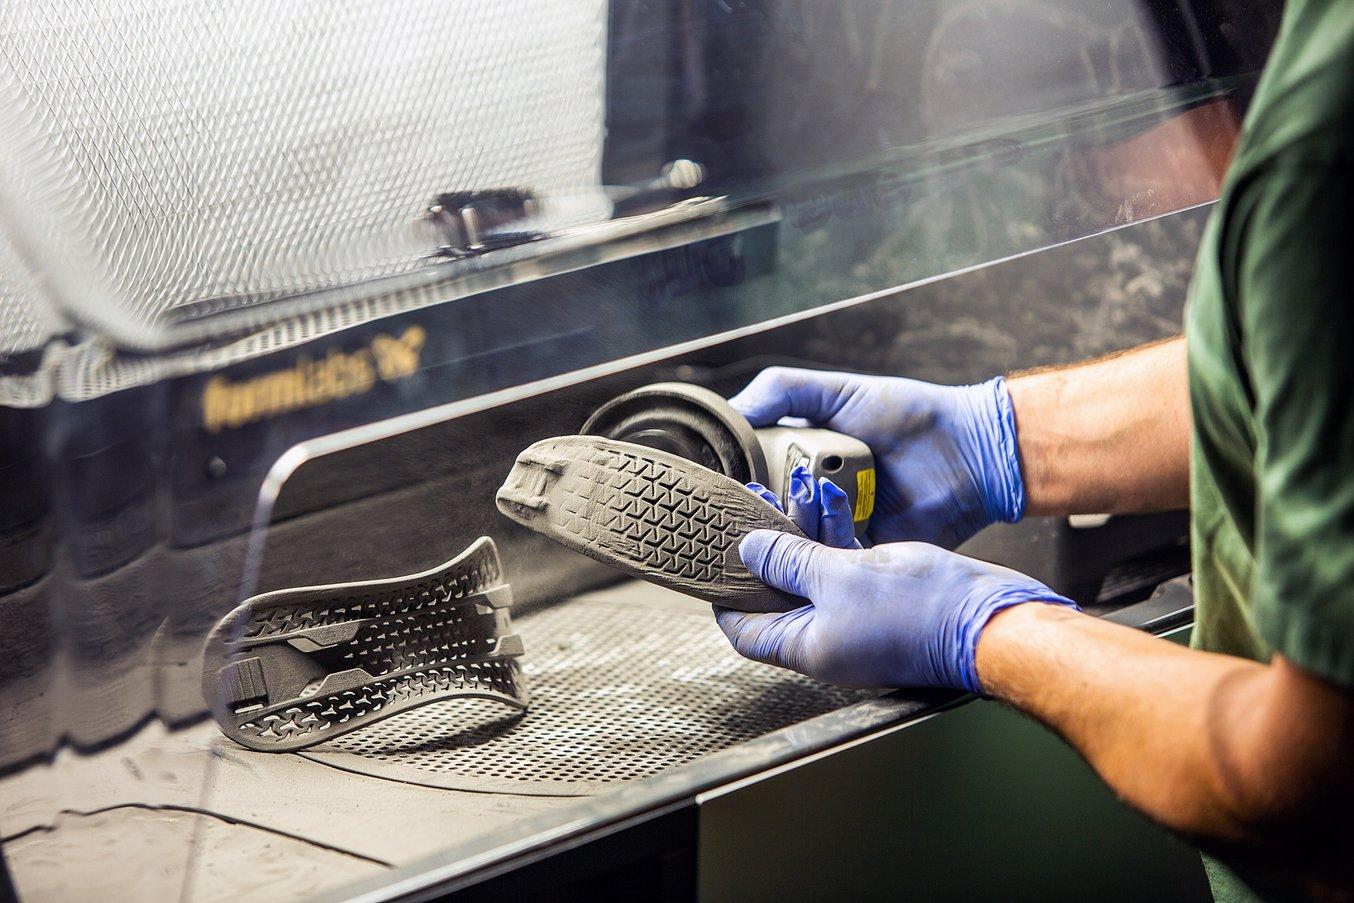 Rome Snowboards uses selective laser sintering (SLS) 3D printers to accelerate their product development and the Fuse Sift for post-processing the parts.